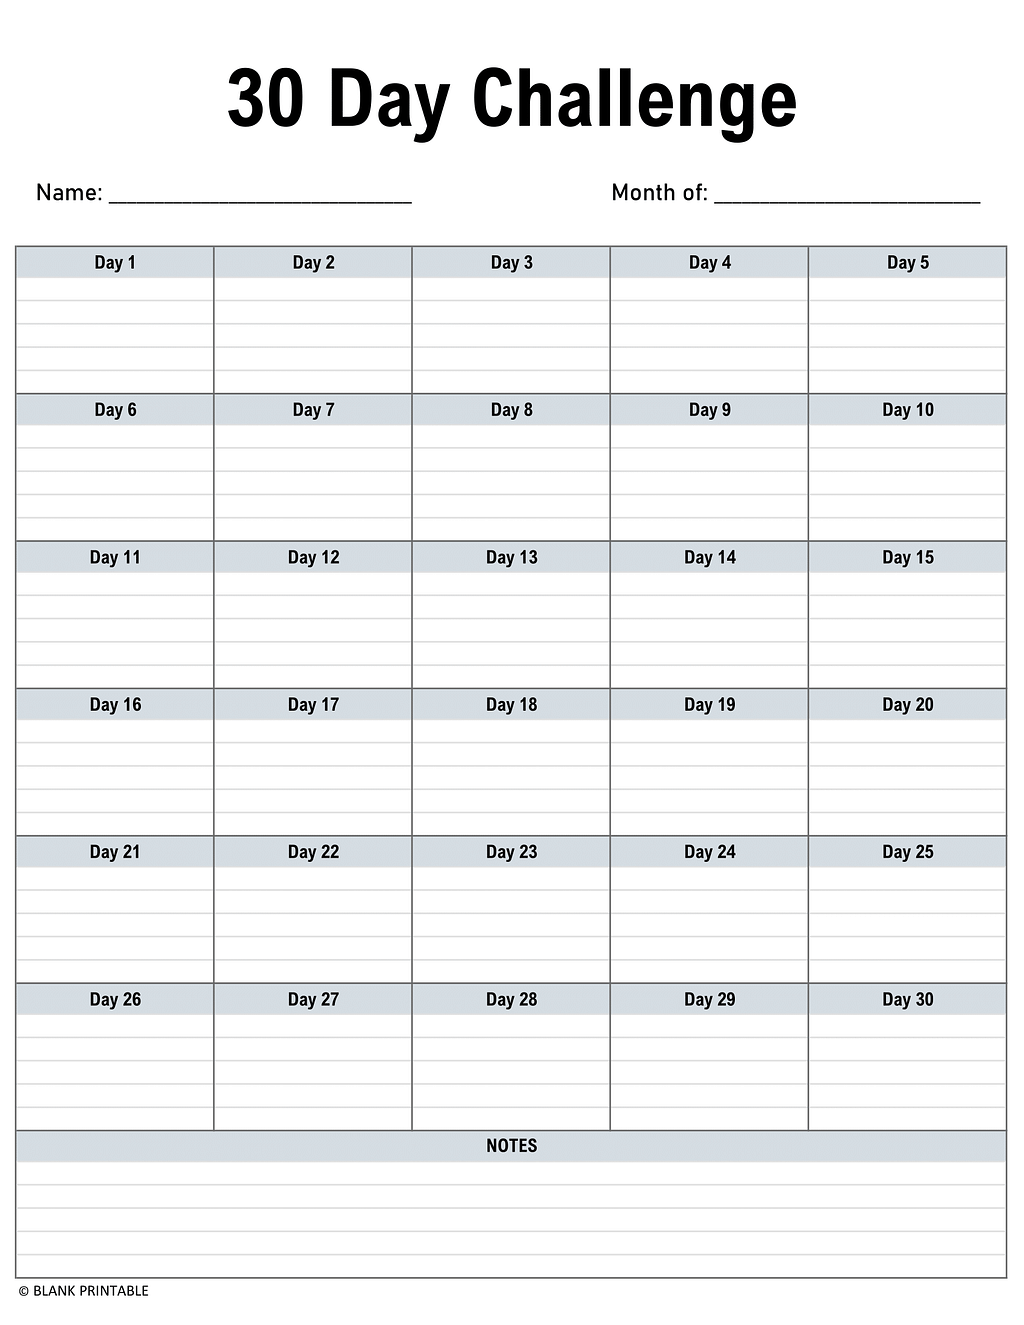 Customizable 30-day challenge blank calendar template, monthly workout planner, tracking sheet, instant download files.